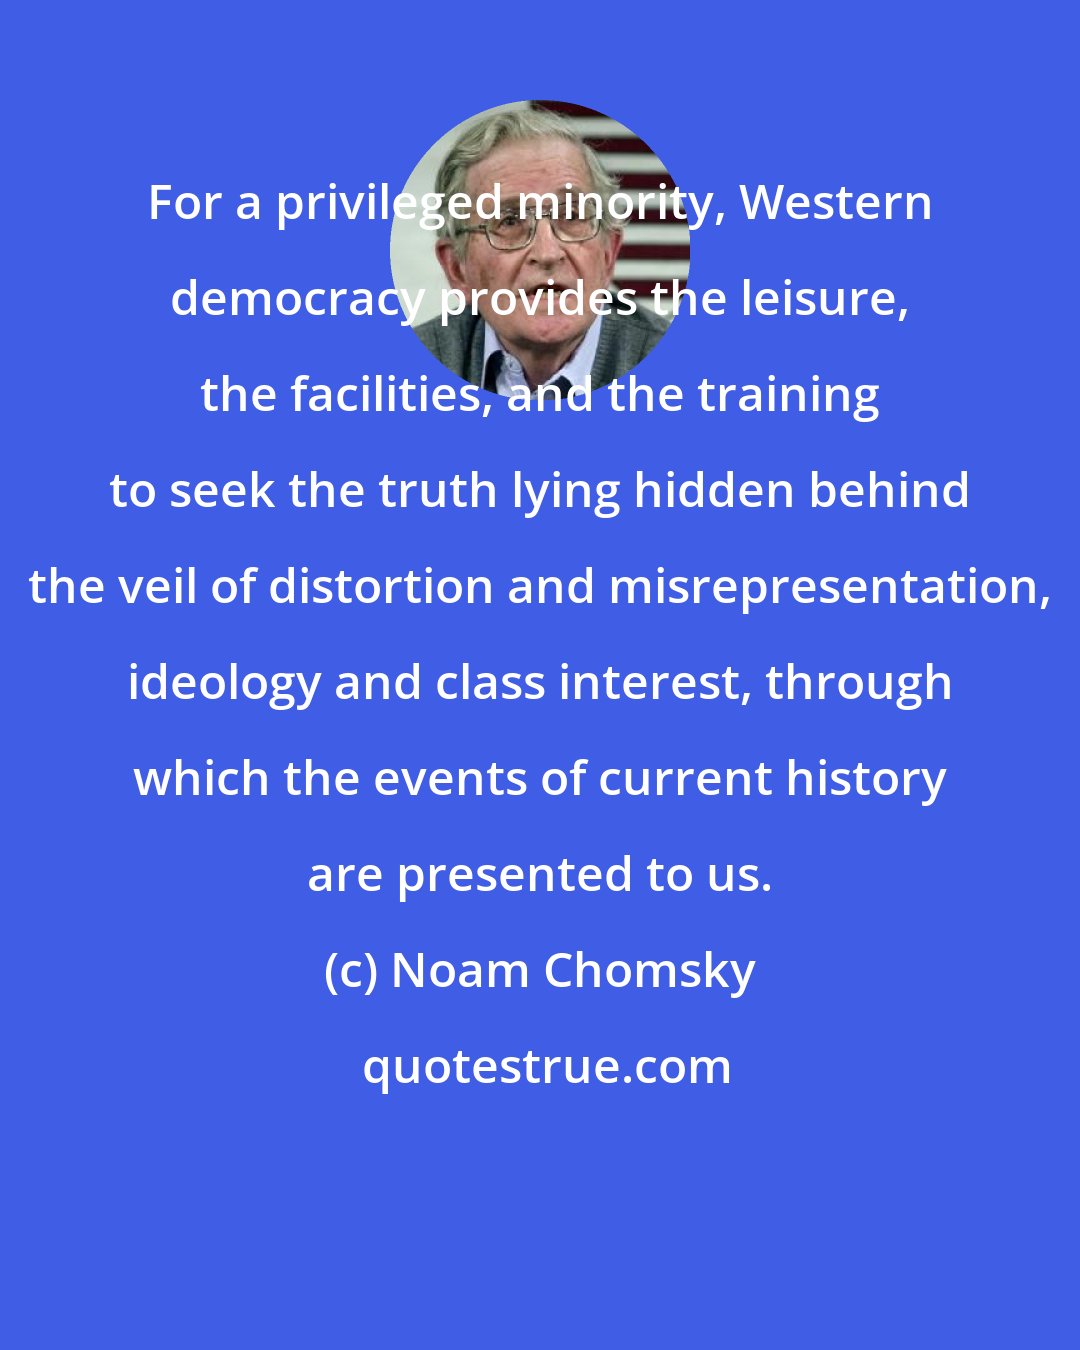 Noam Chomsky: For a privileged minority, Western democracy provides the leisure, the facilities, and the training to seek the truth lying hidden behind the veil of distortion and misrepresentation, ideology and class interest, through which the events of current history are presented to us.